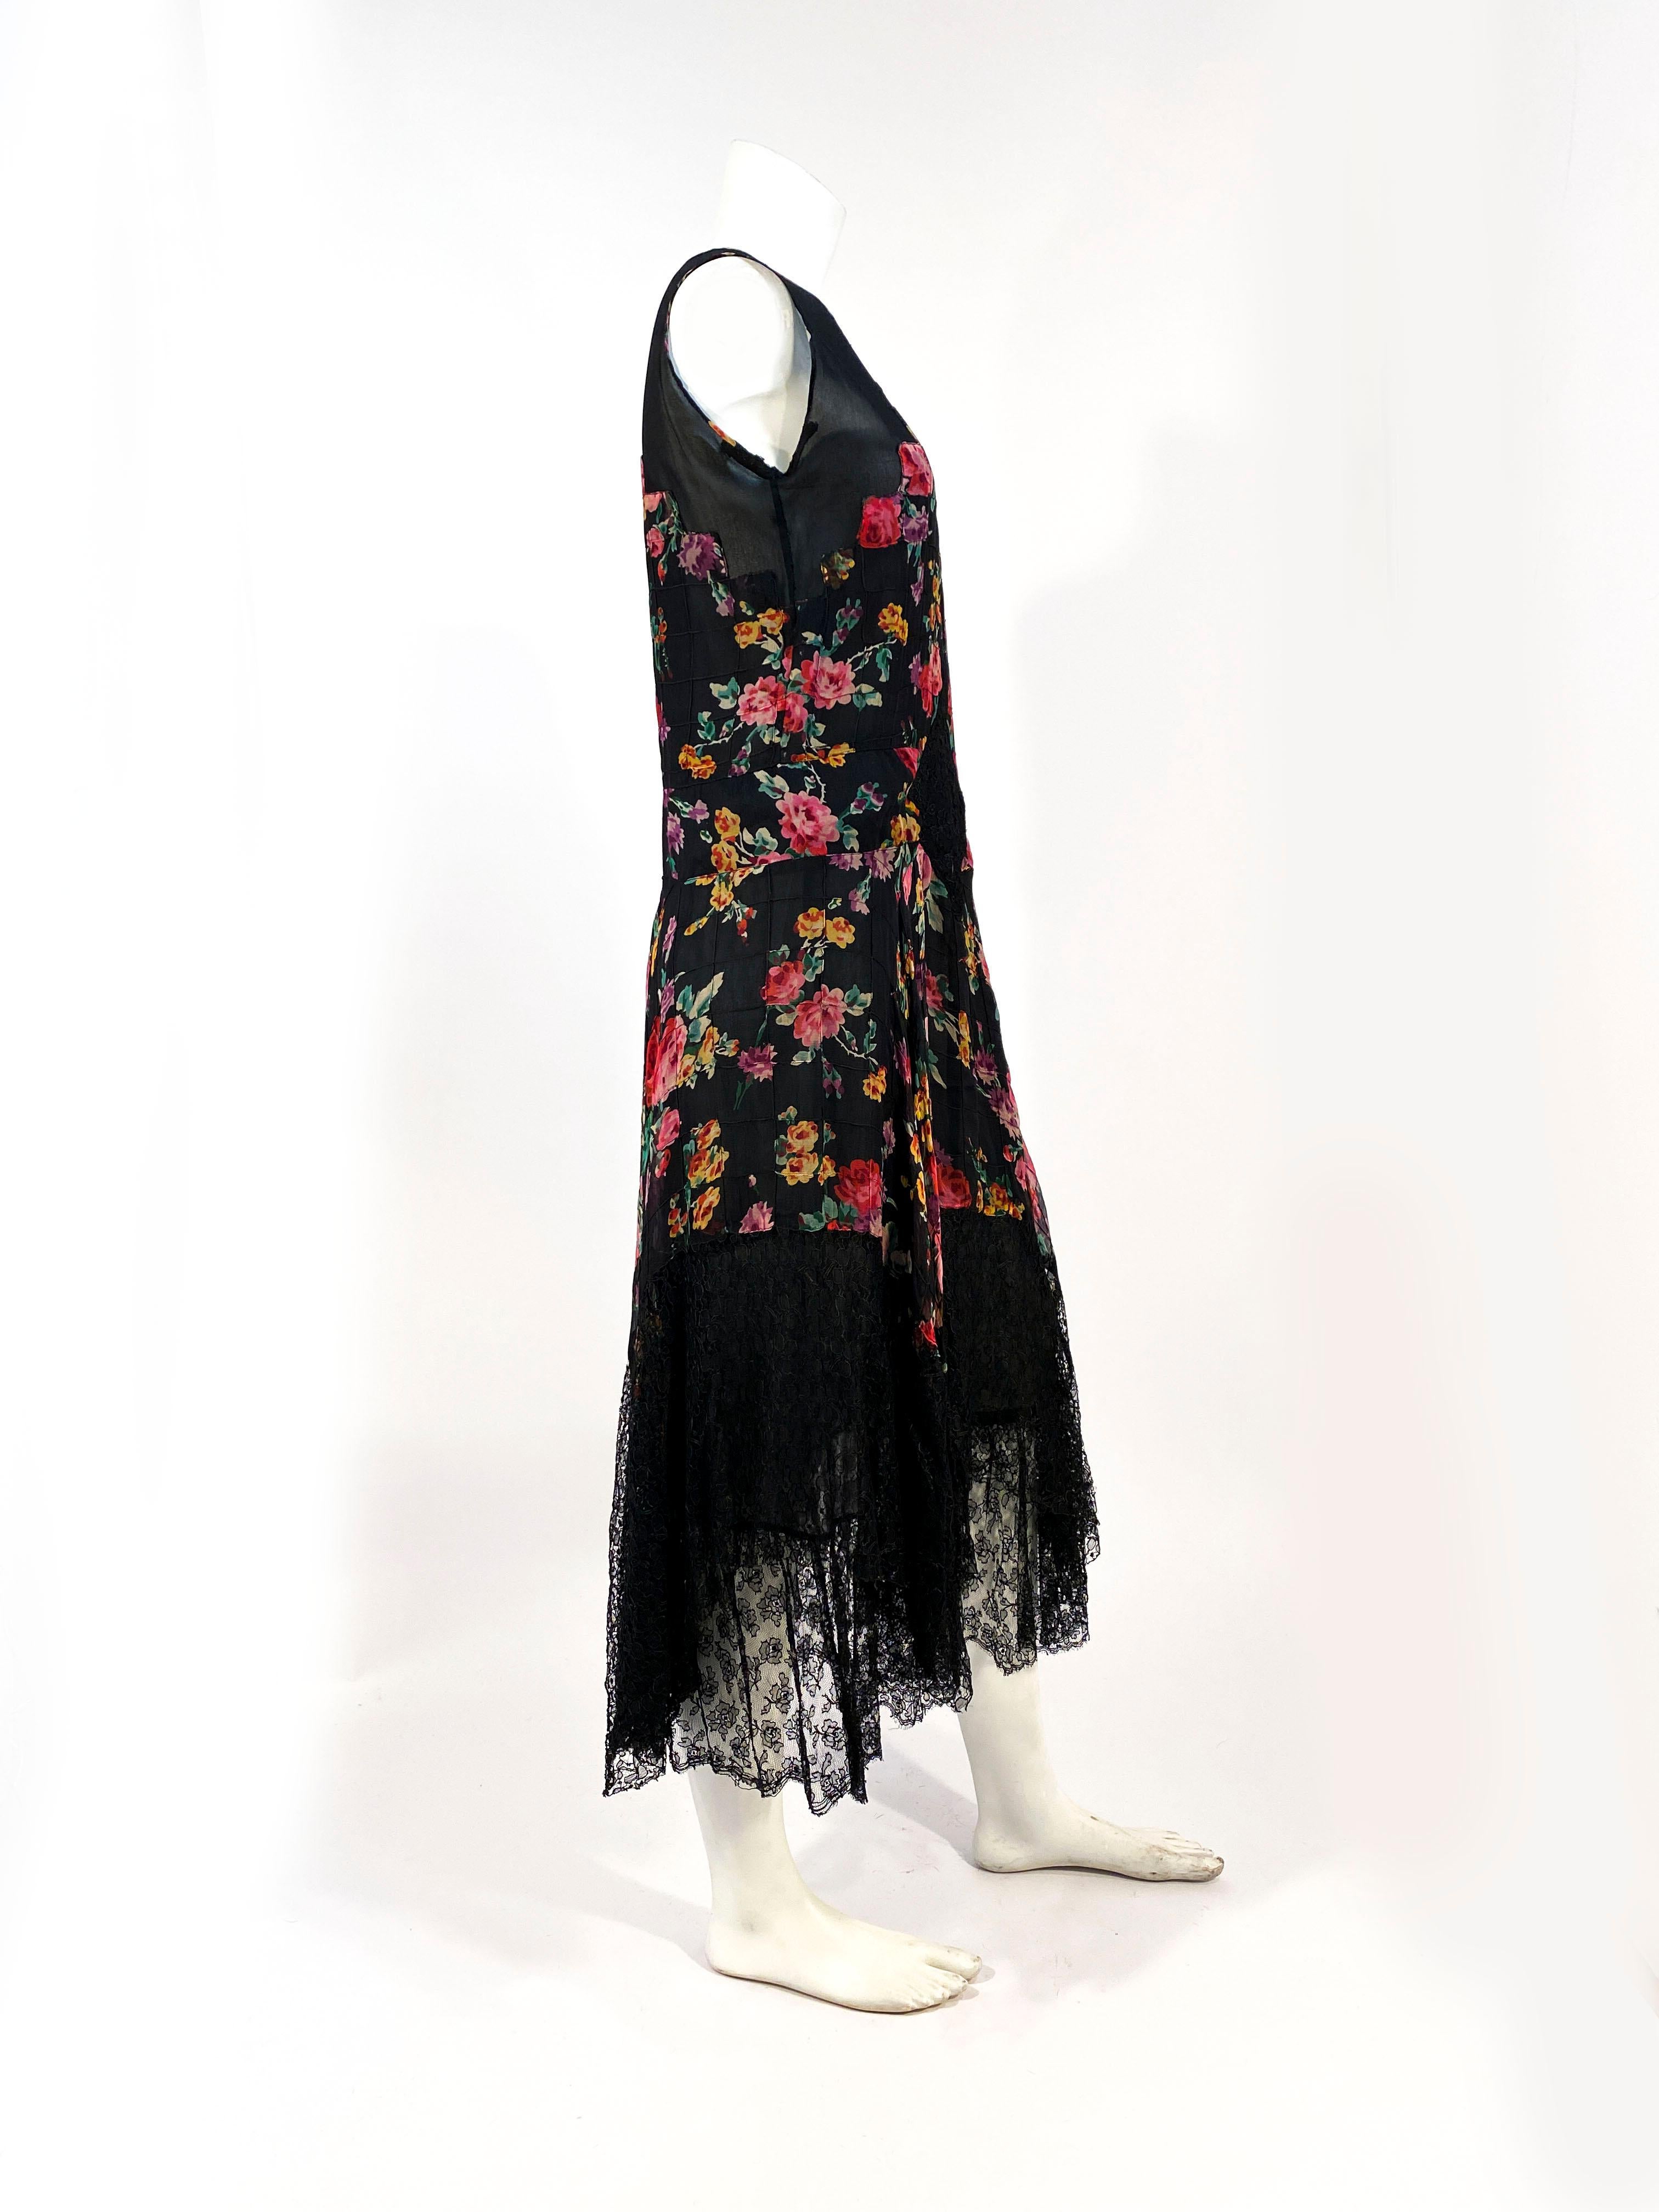 Black 1920s Floral Printed Chiffon Drop-waist Dress with Lace Accents For Sale